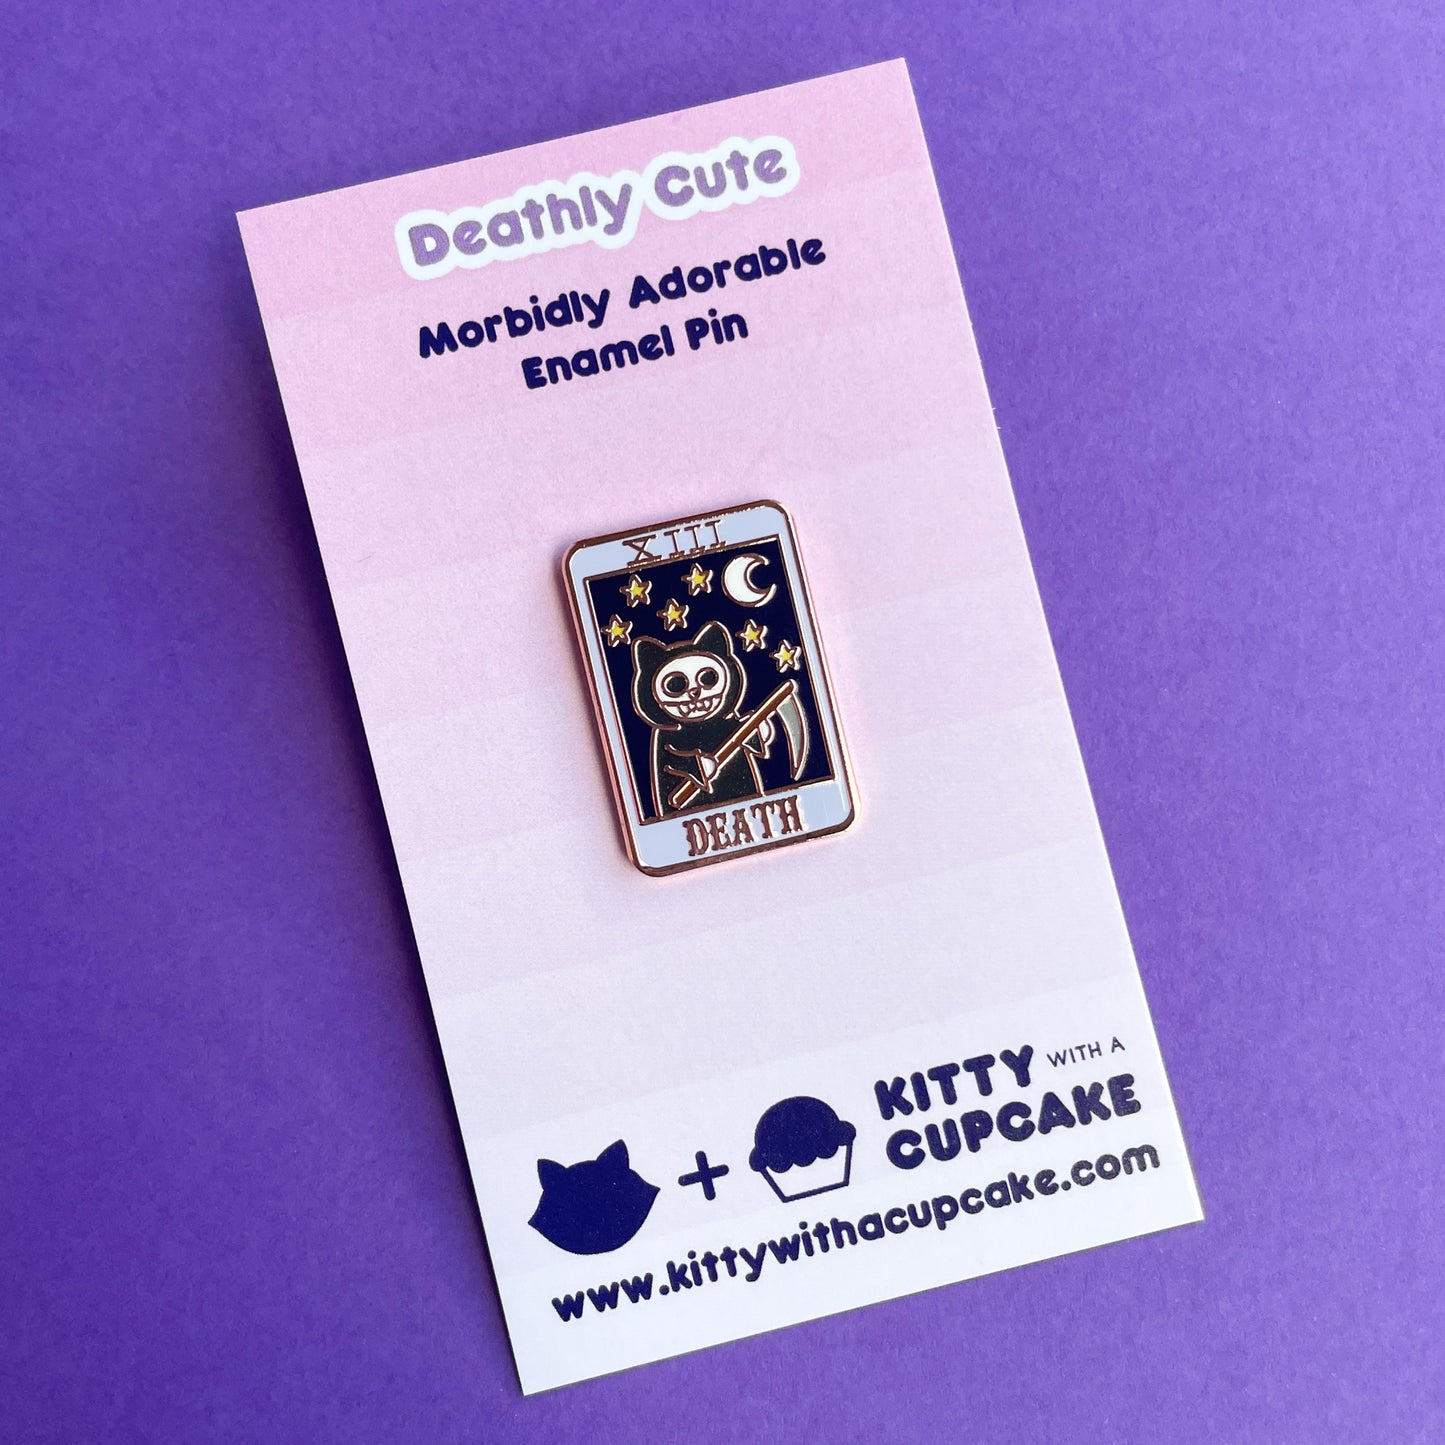 An enamel pin shaped like a tarot card with a grim reaper cat with a night sky on it and the word "Death" on a pink card.